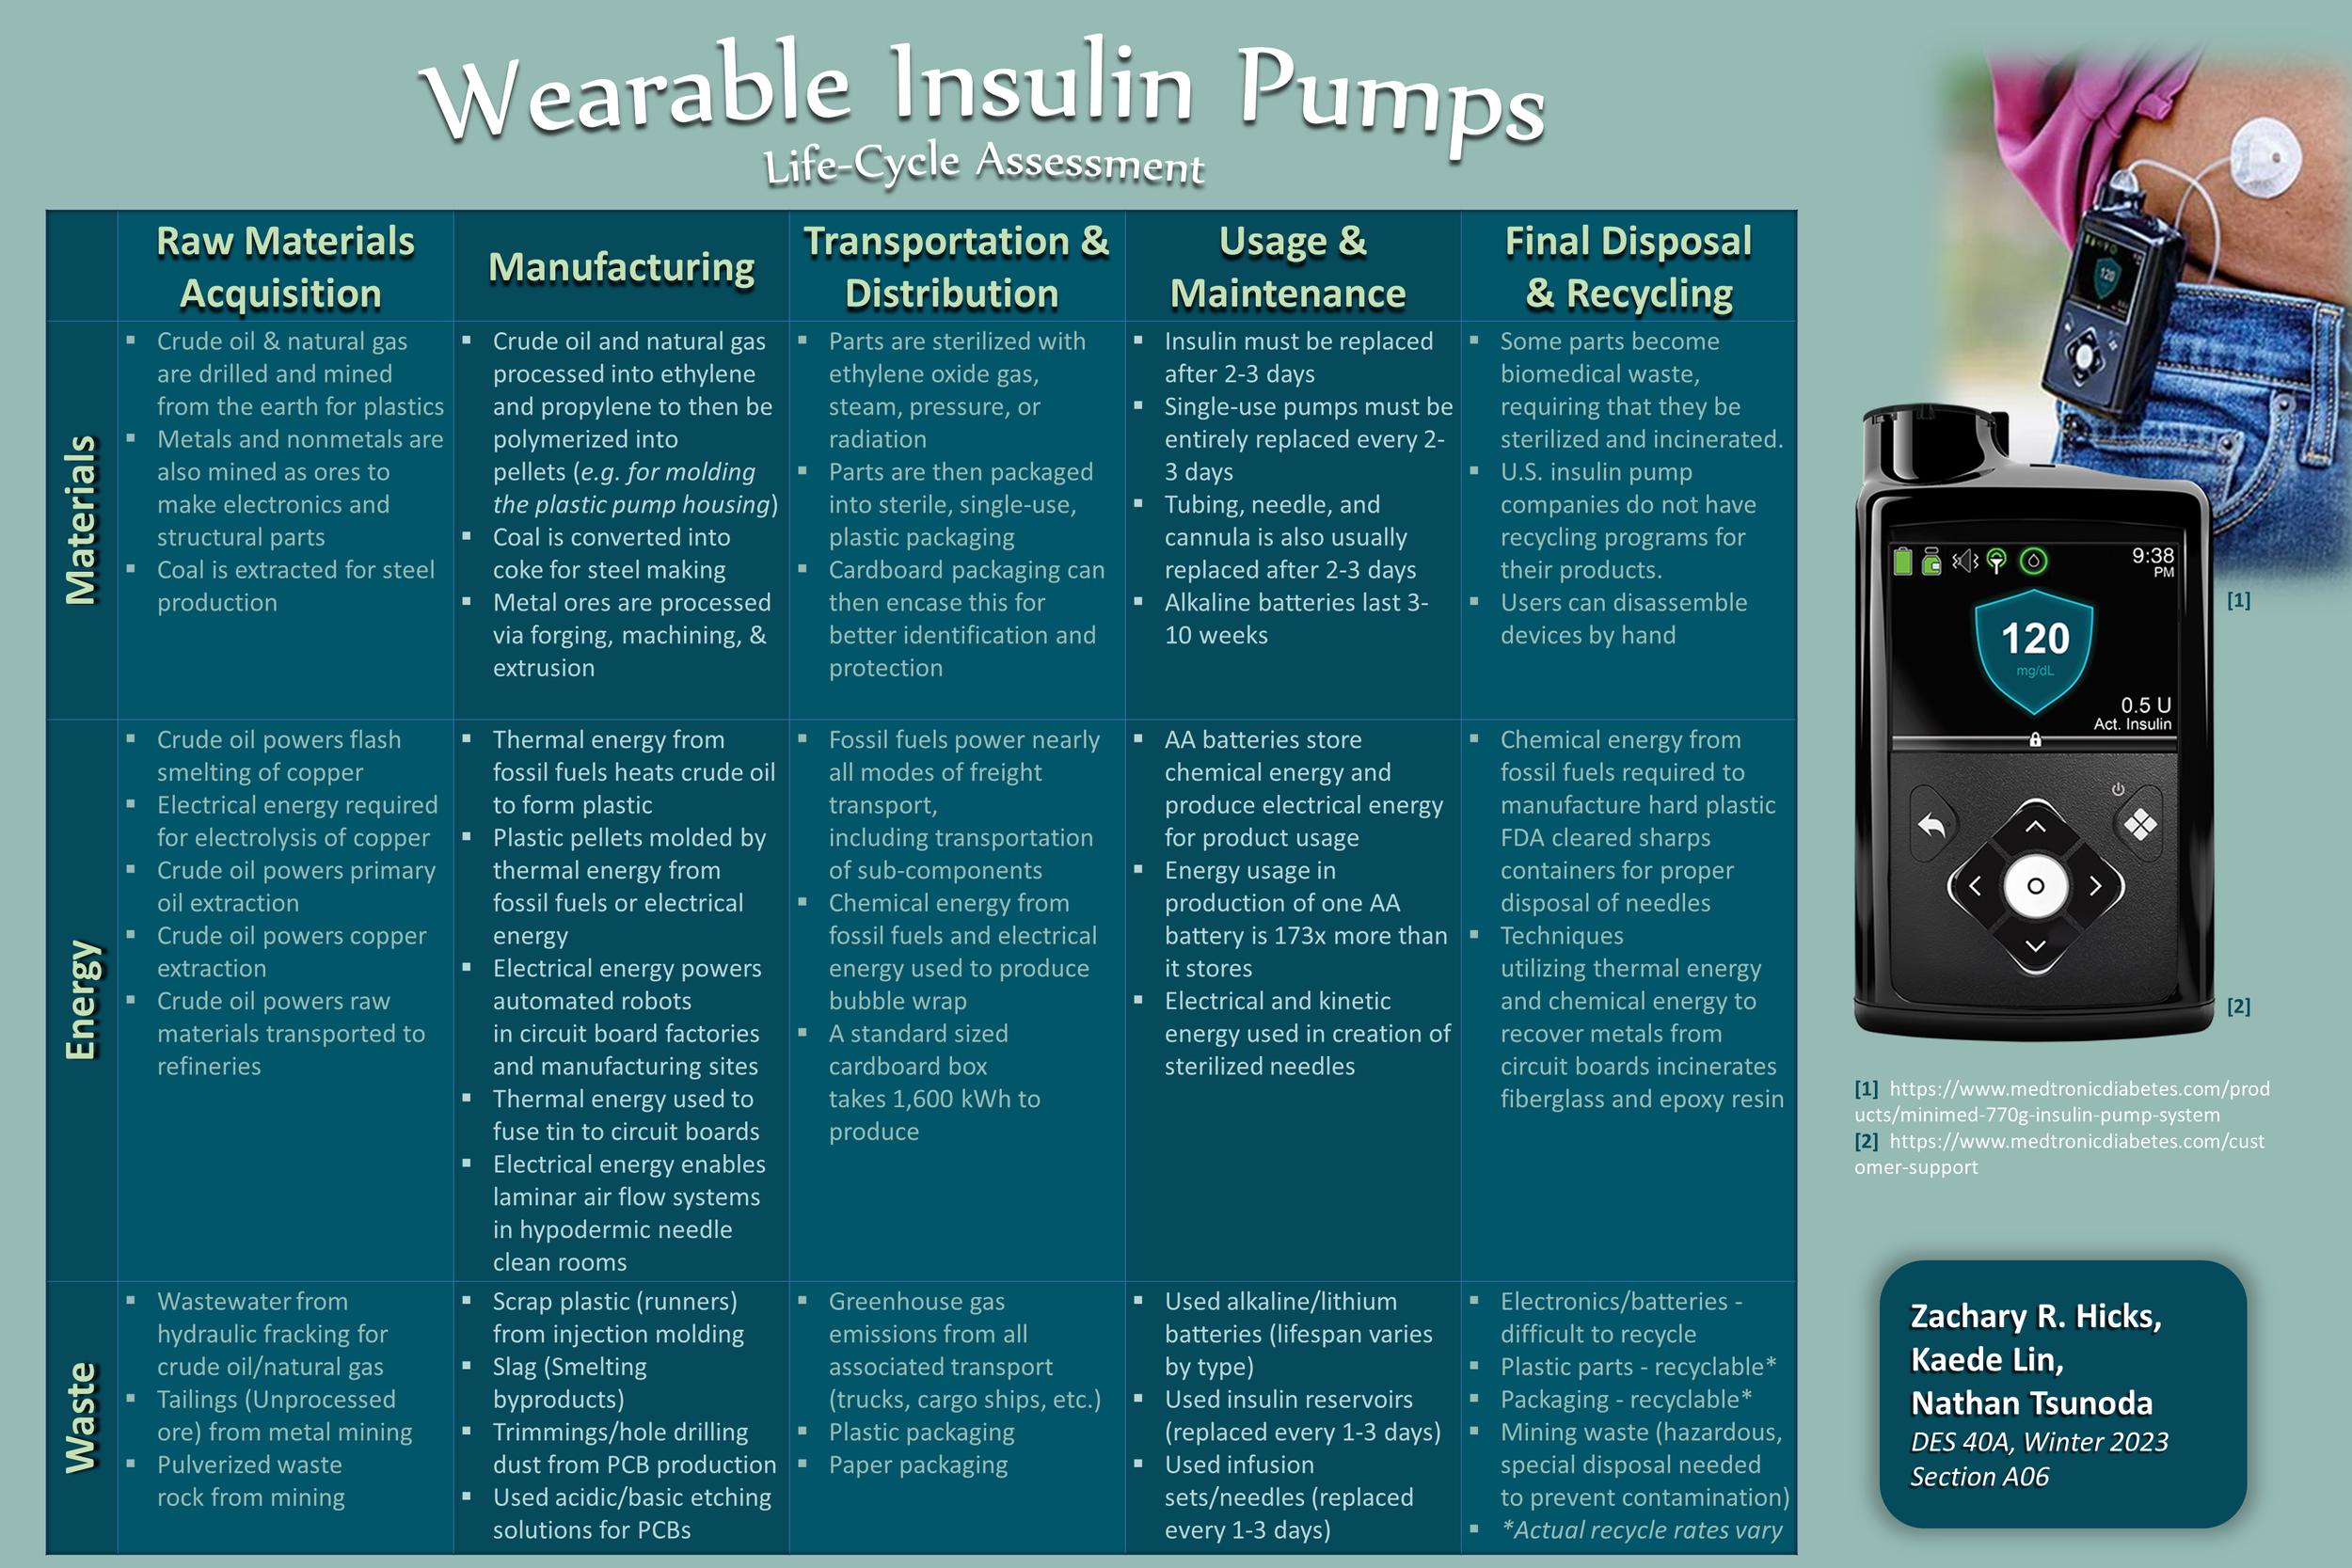 Wearable Insulin Pumps — Design Life-Cycle